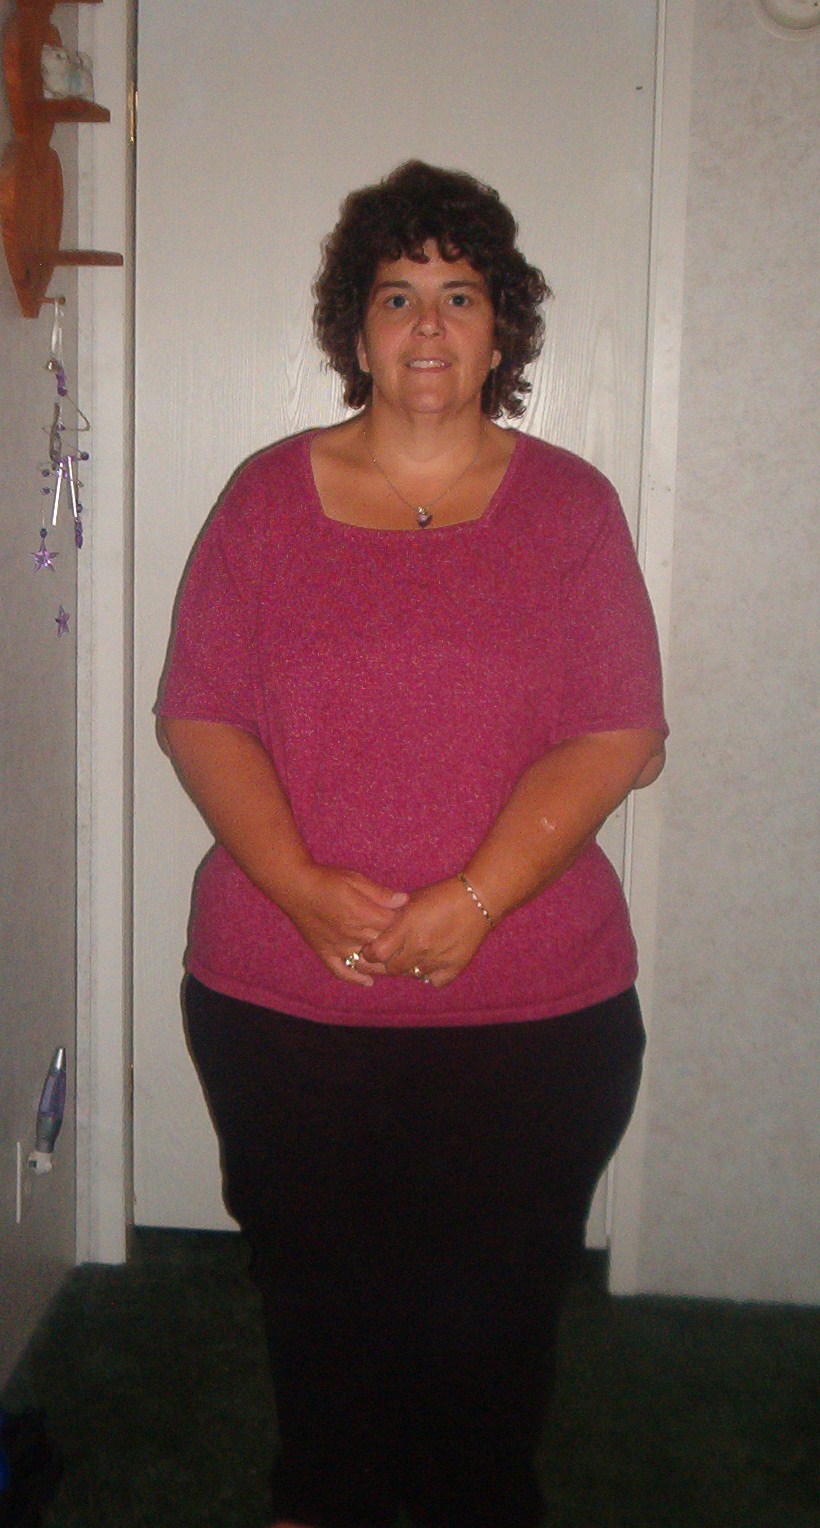 [me+after+1+year+139+lbs+lighter.JPG]